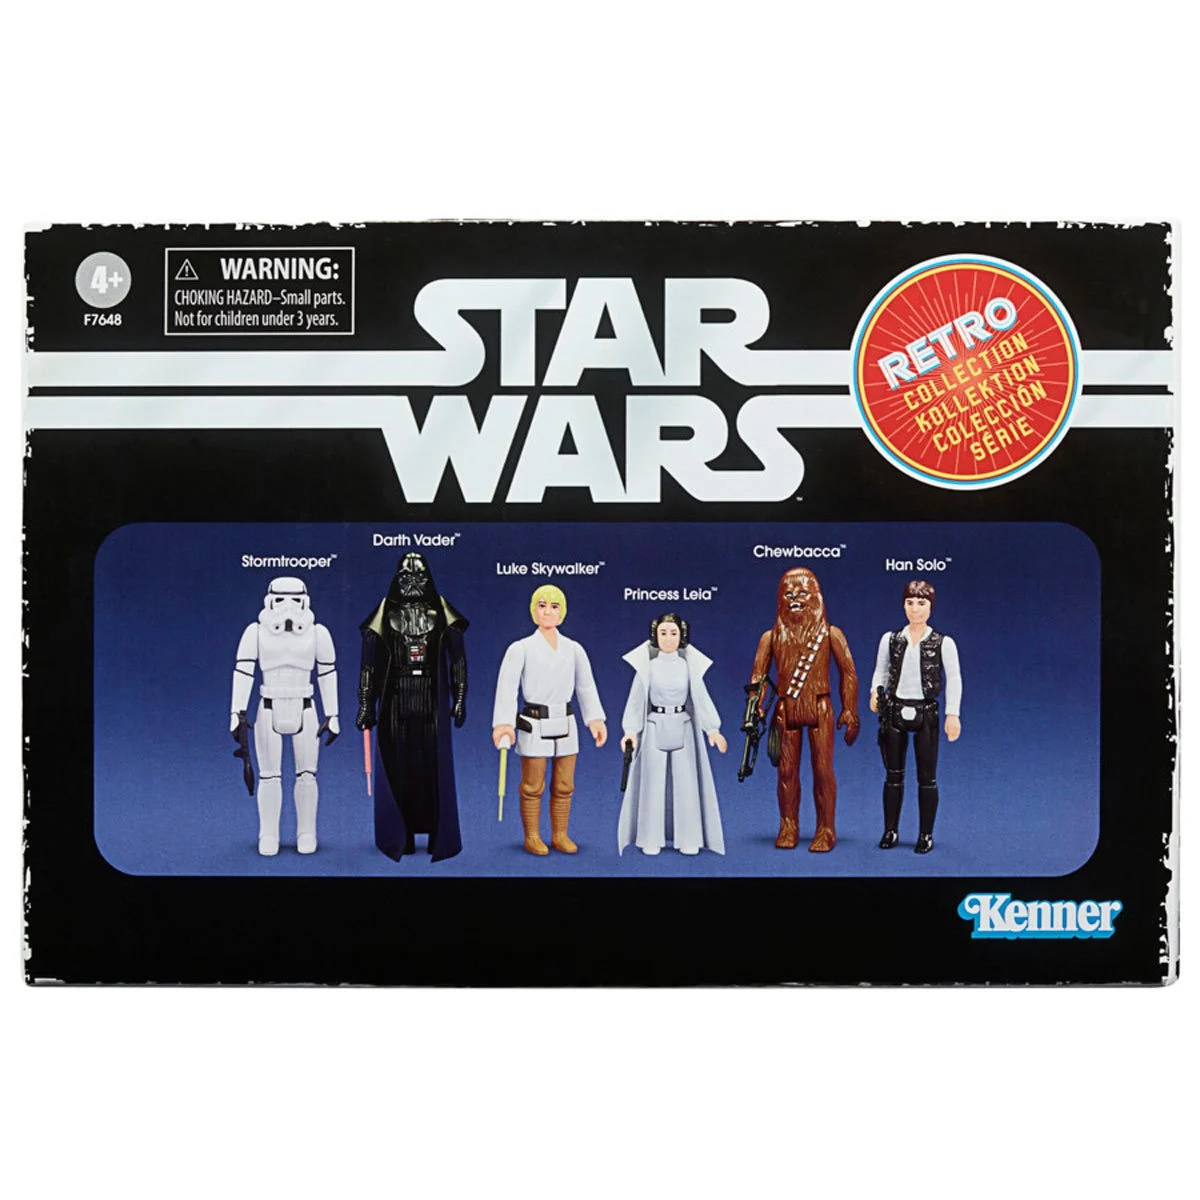 Star Wars The Retro Collection Action Figures Set of 6 HSF7648 5010994167295